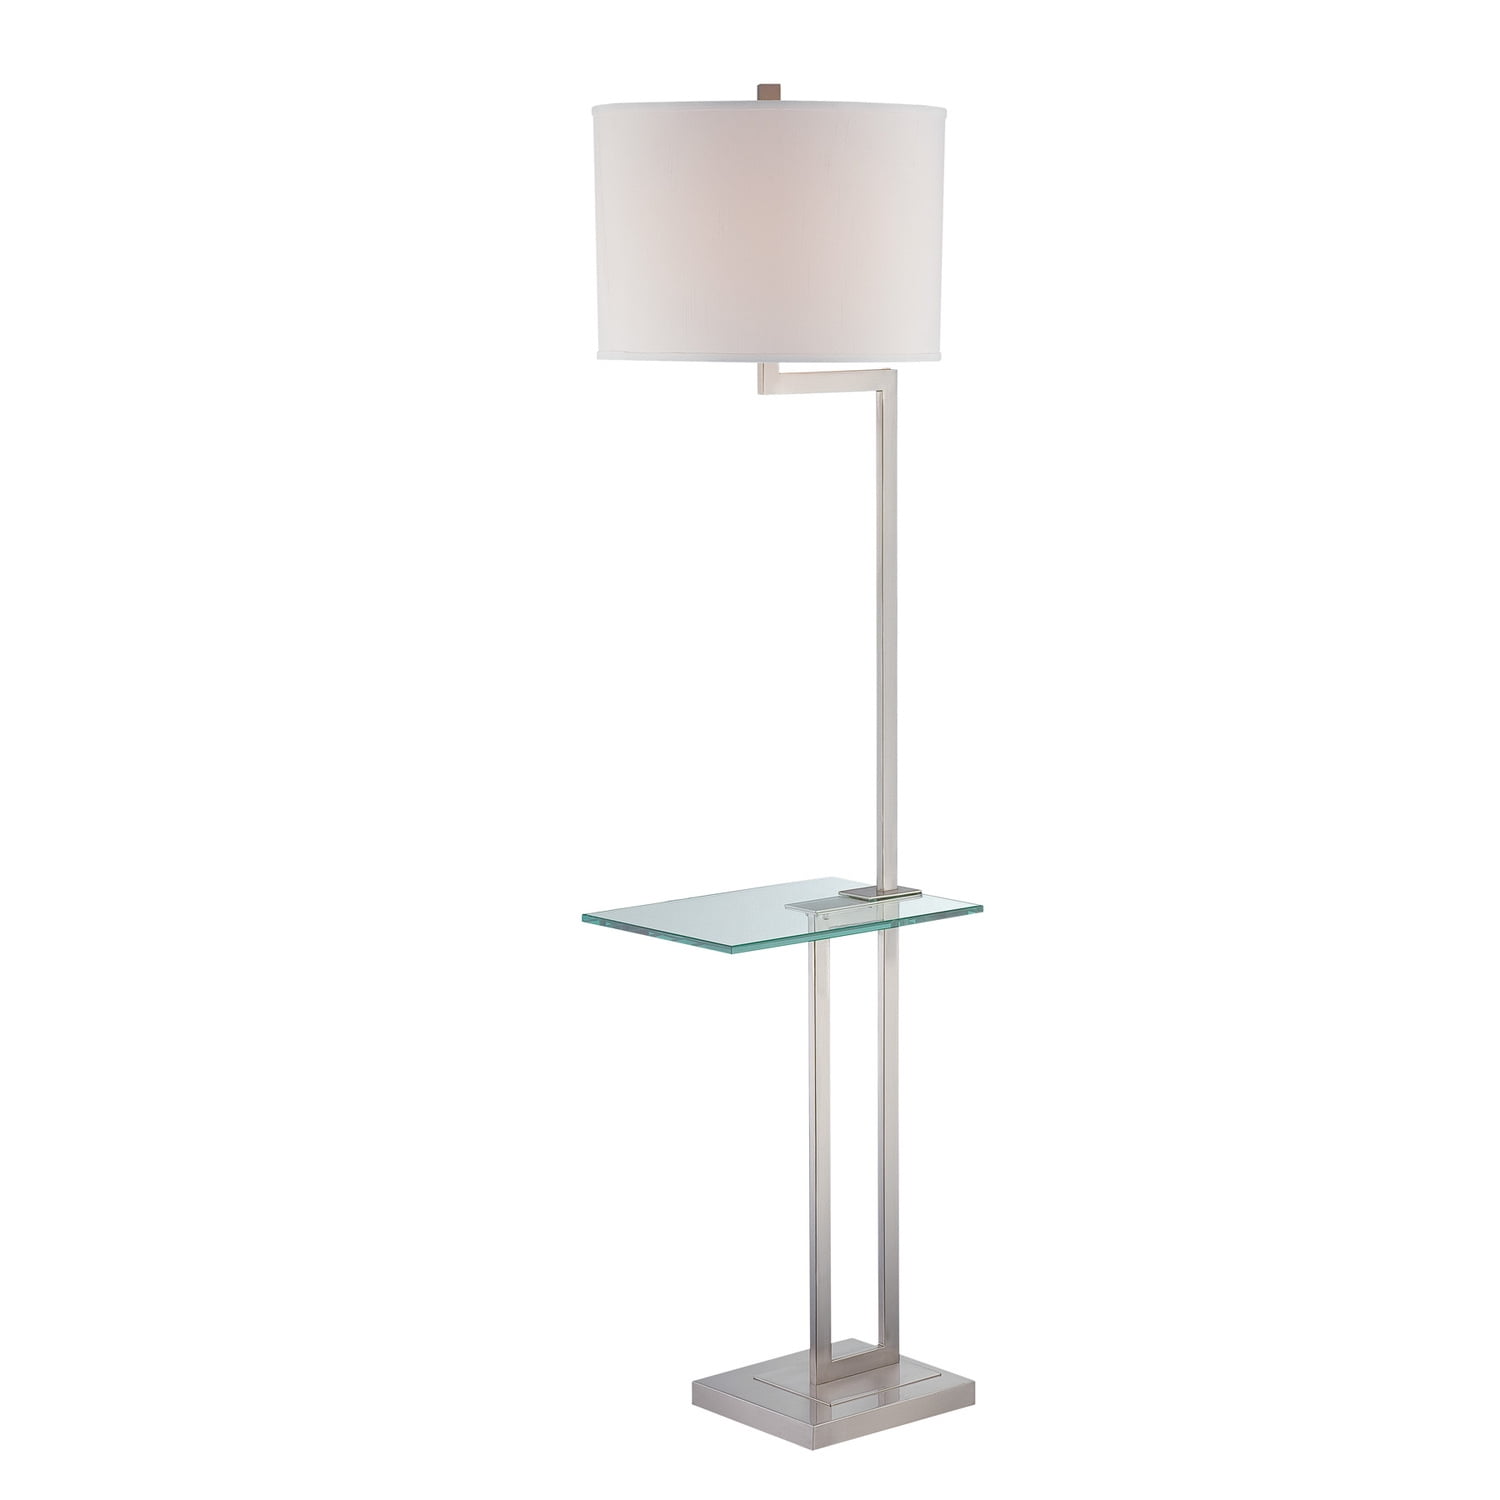 Rudko 1 Light Floor Lamp With Polished, Floor Lamp With Tray Uk